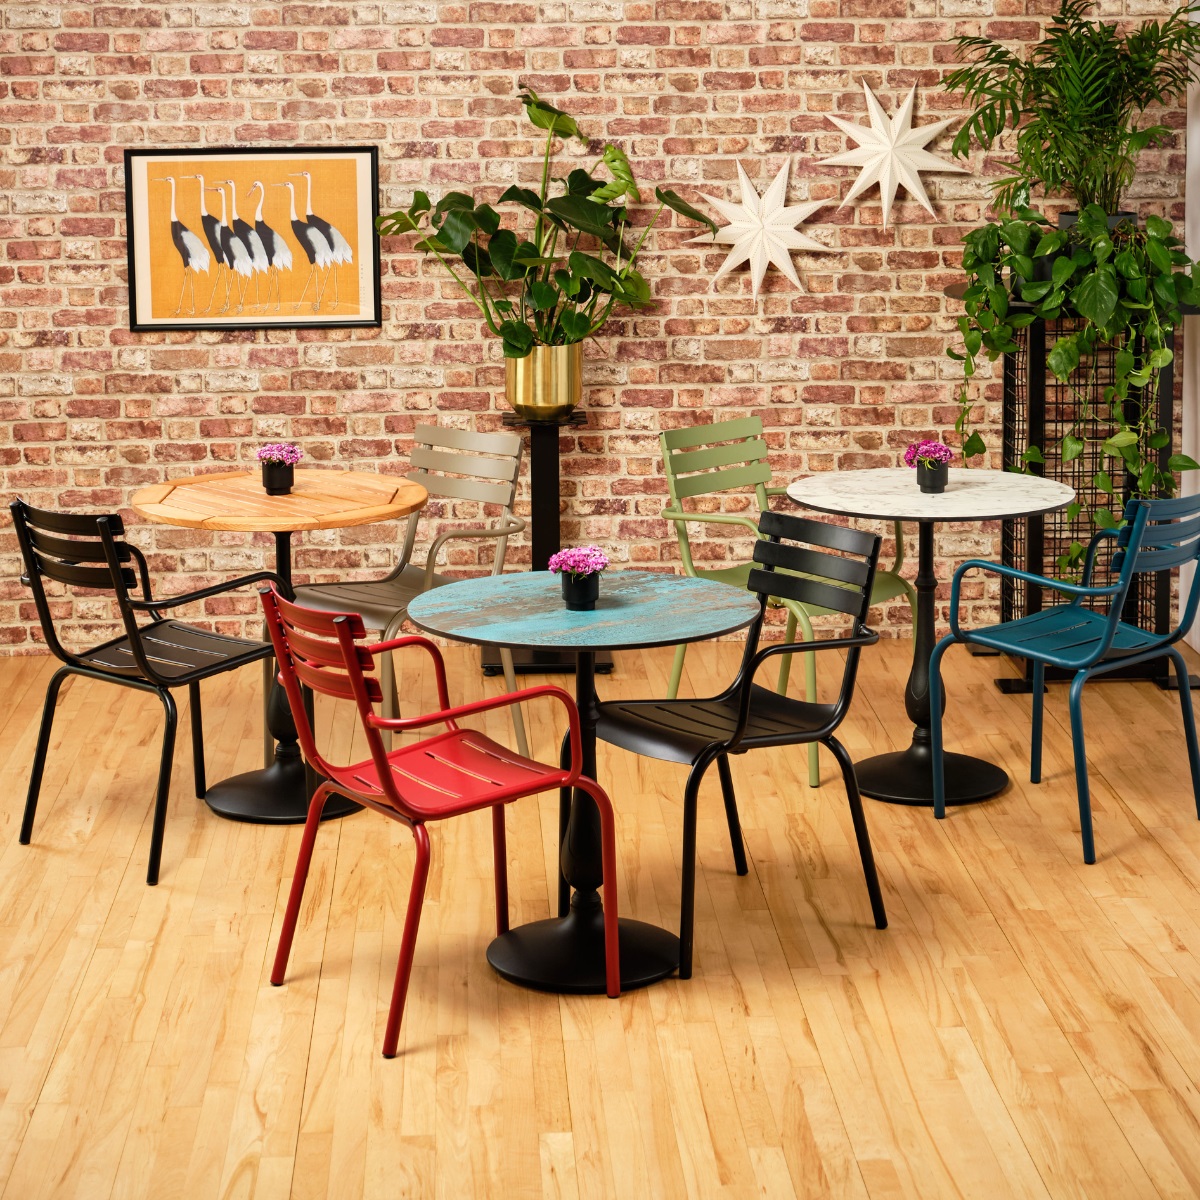 Colourful bistro pedestal tables and chairs